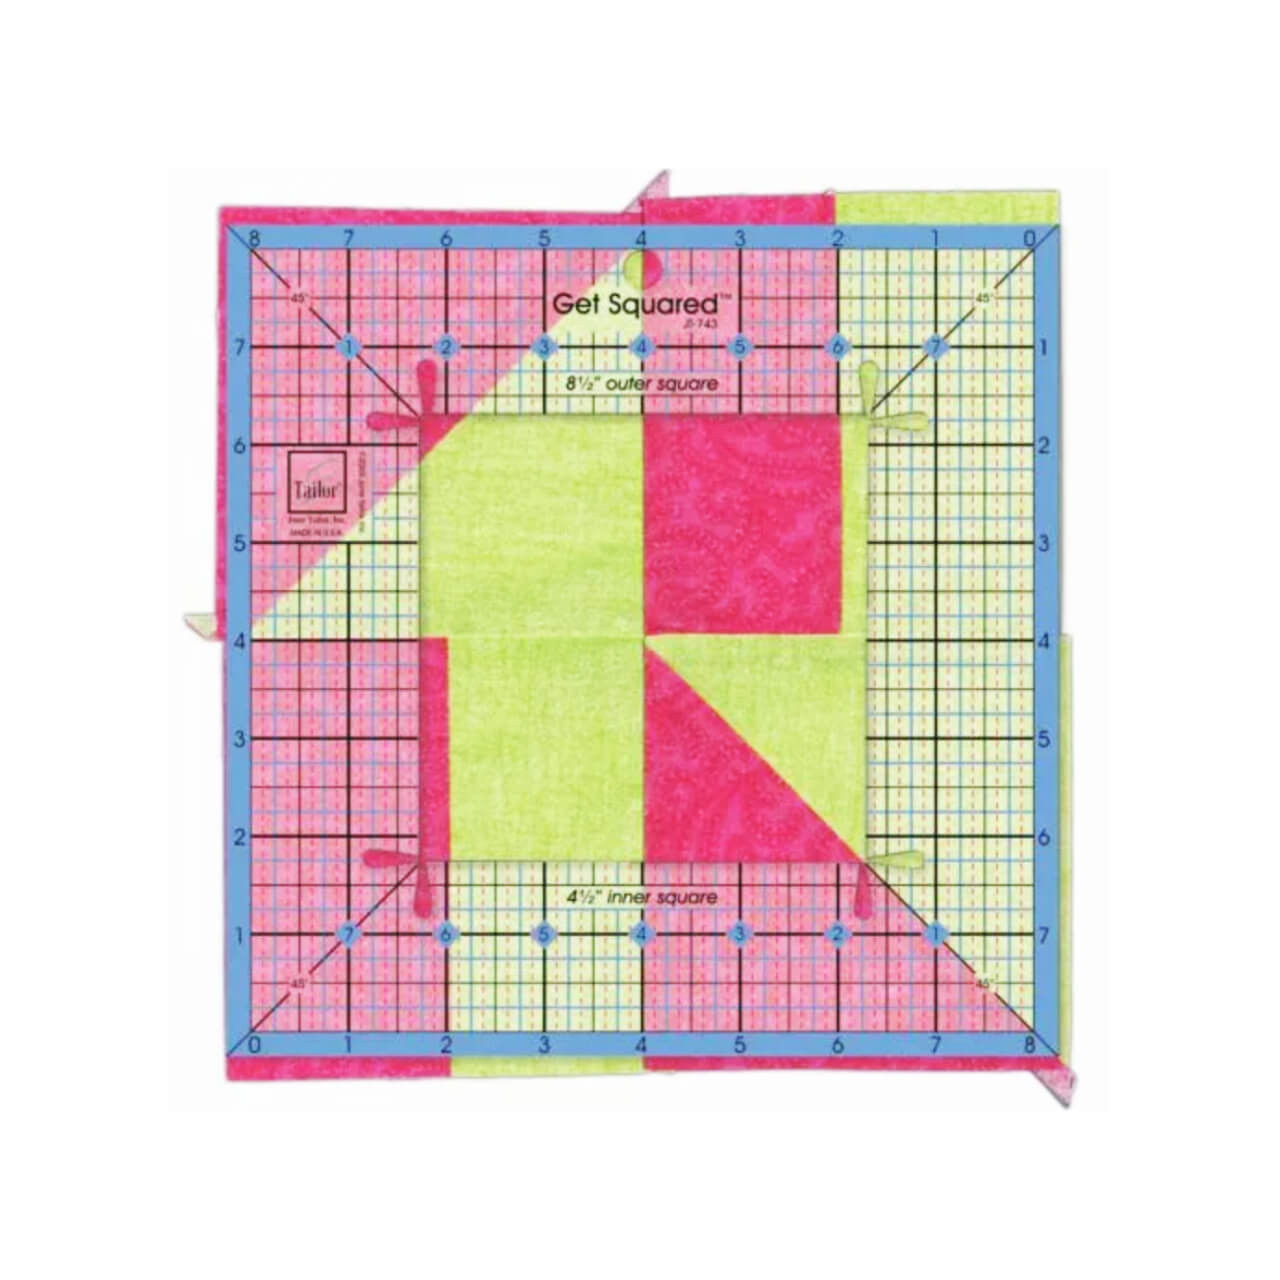 The Medium Get Squared Ruler by June Tailor is shown in use, overlaying a colorful quilt block composed of pink, green, and yellow sections, demonstrating the ruler's capability for precise measurement and trimming.